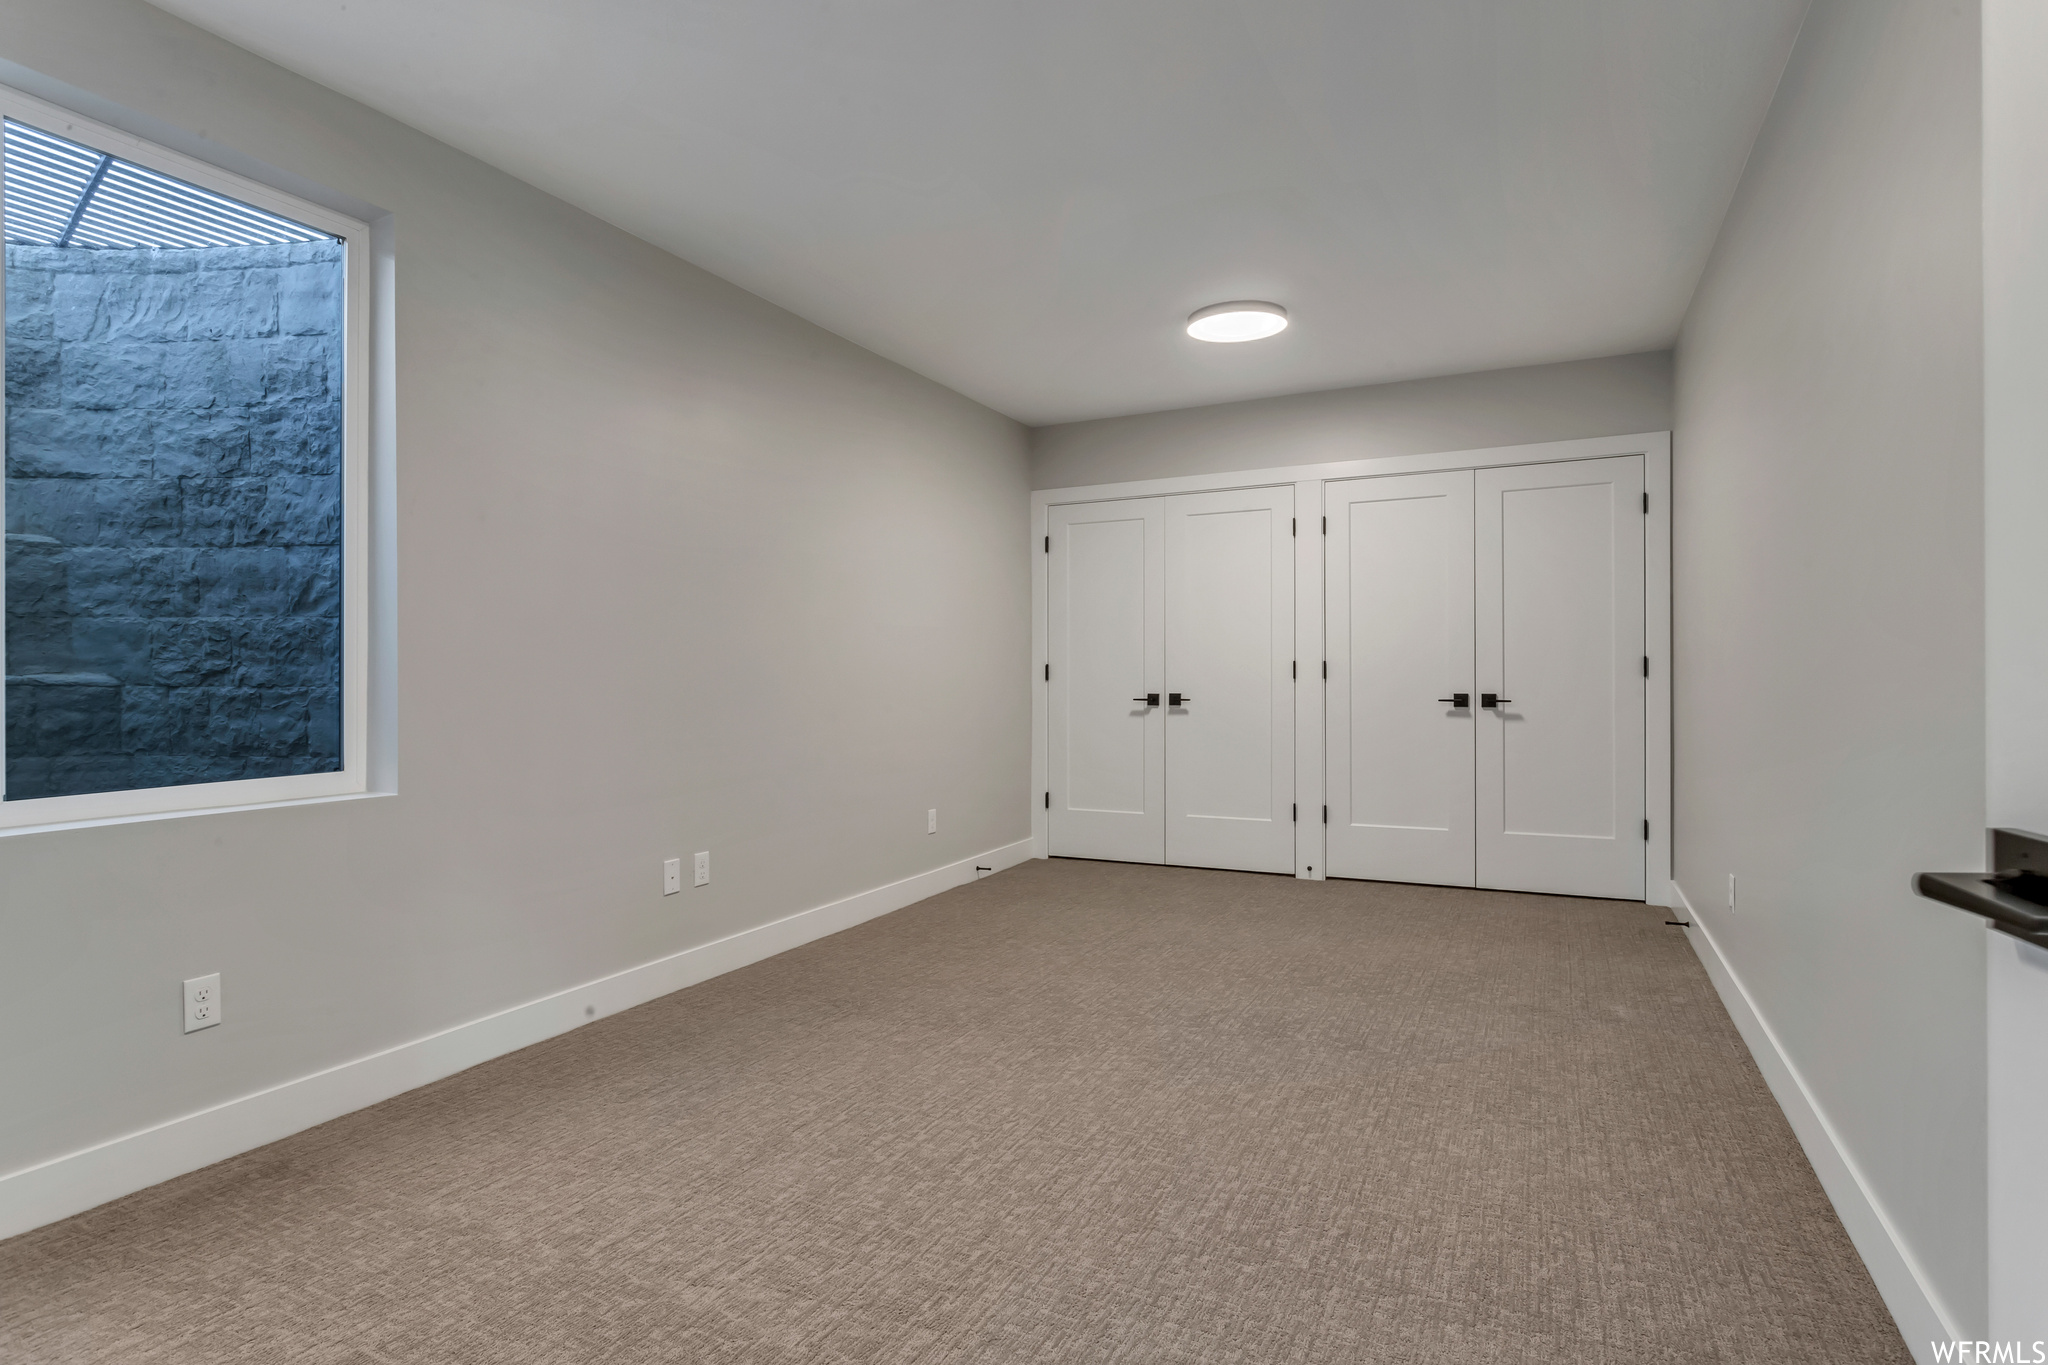 This owner added closets to this room under the third car garage for use as an additional bedroom or office